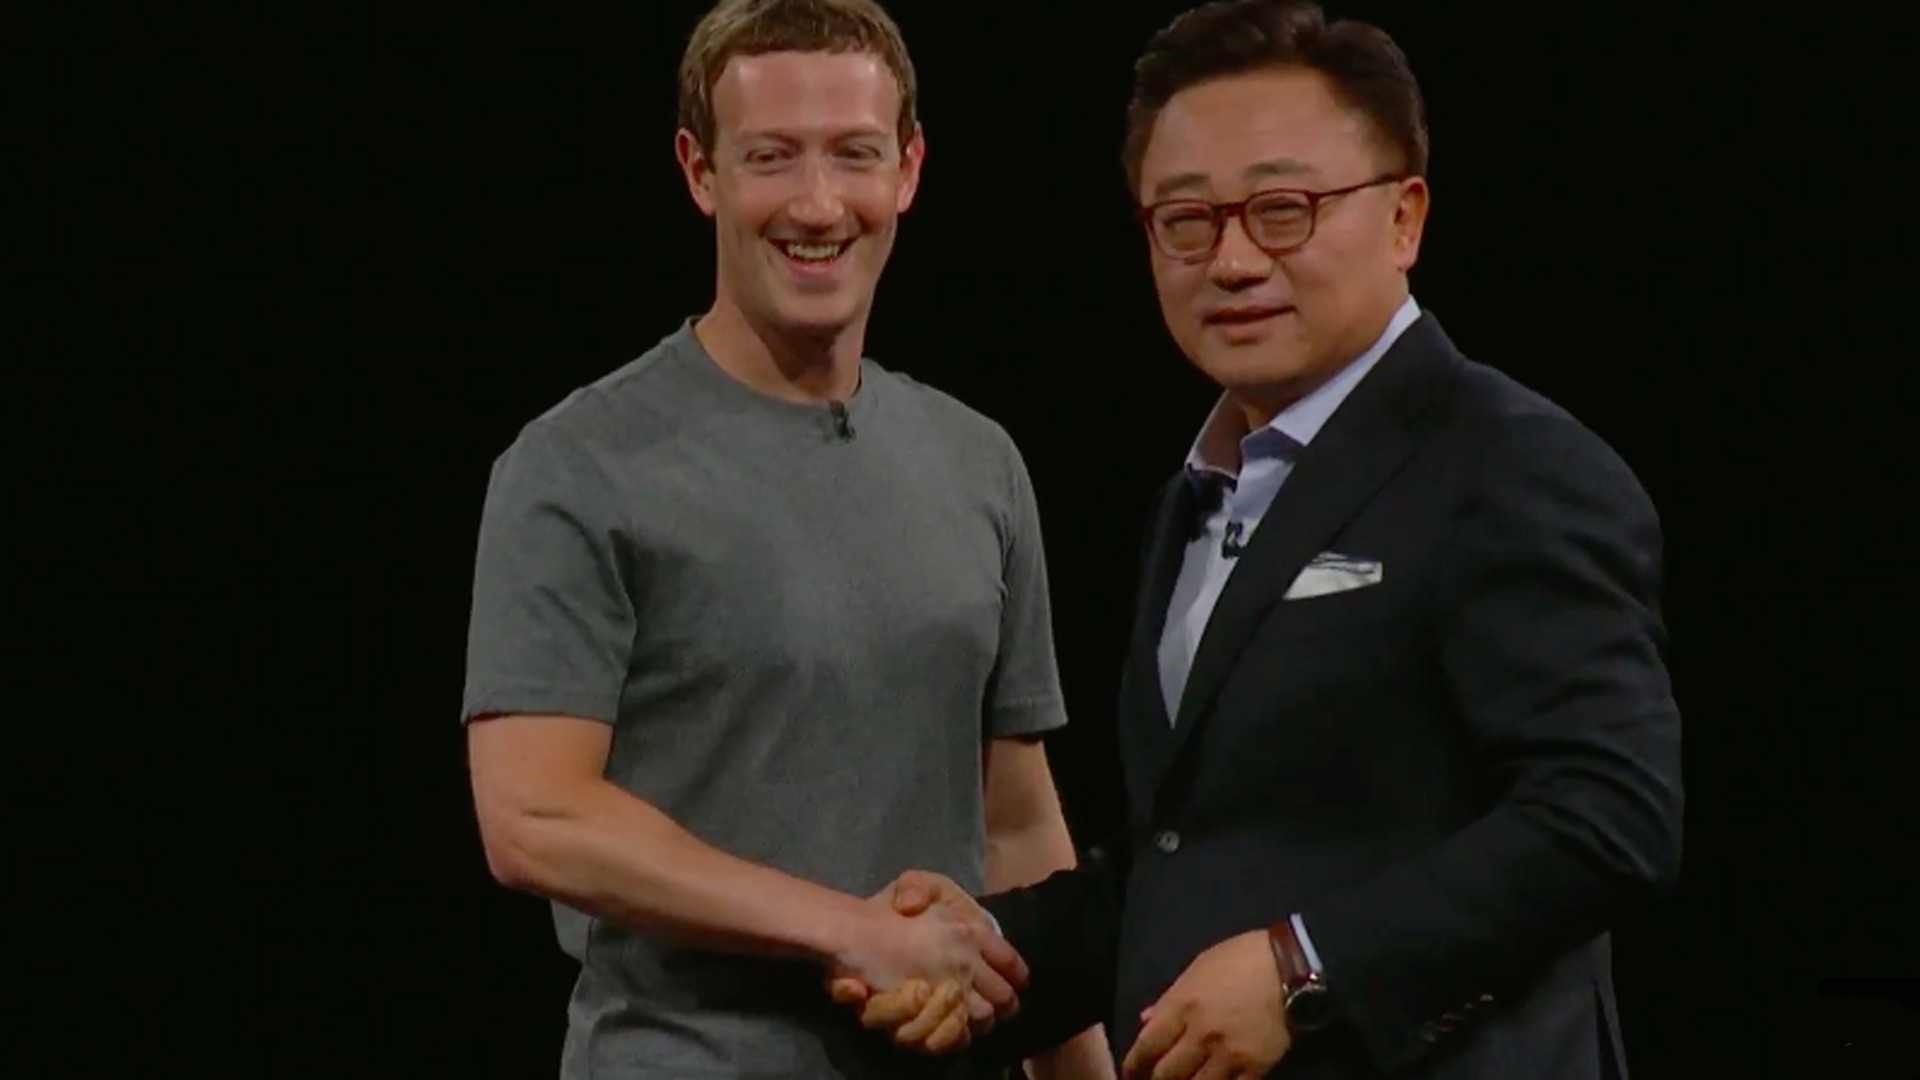 Samsung mobile president DJ Koh and Zuckerberg on stage to reaffirm Samsung and Facebook’s partnership on virtual reality.